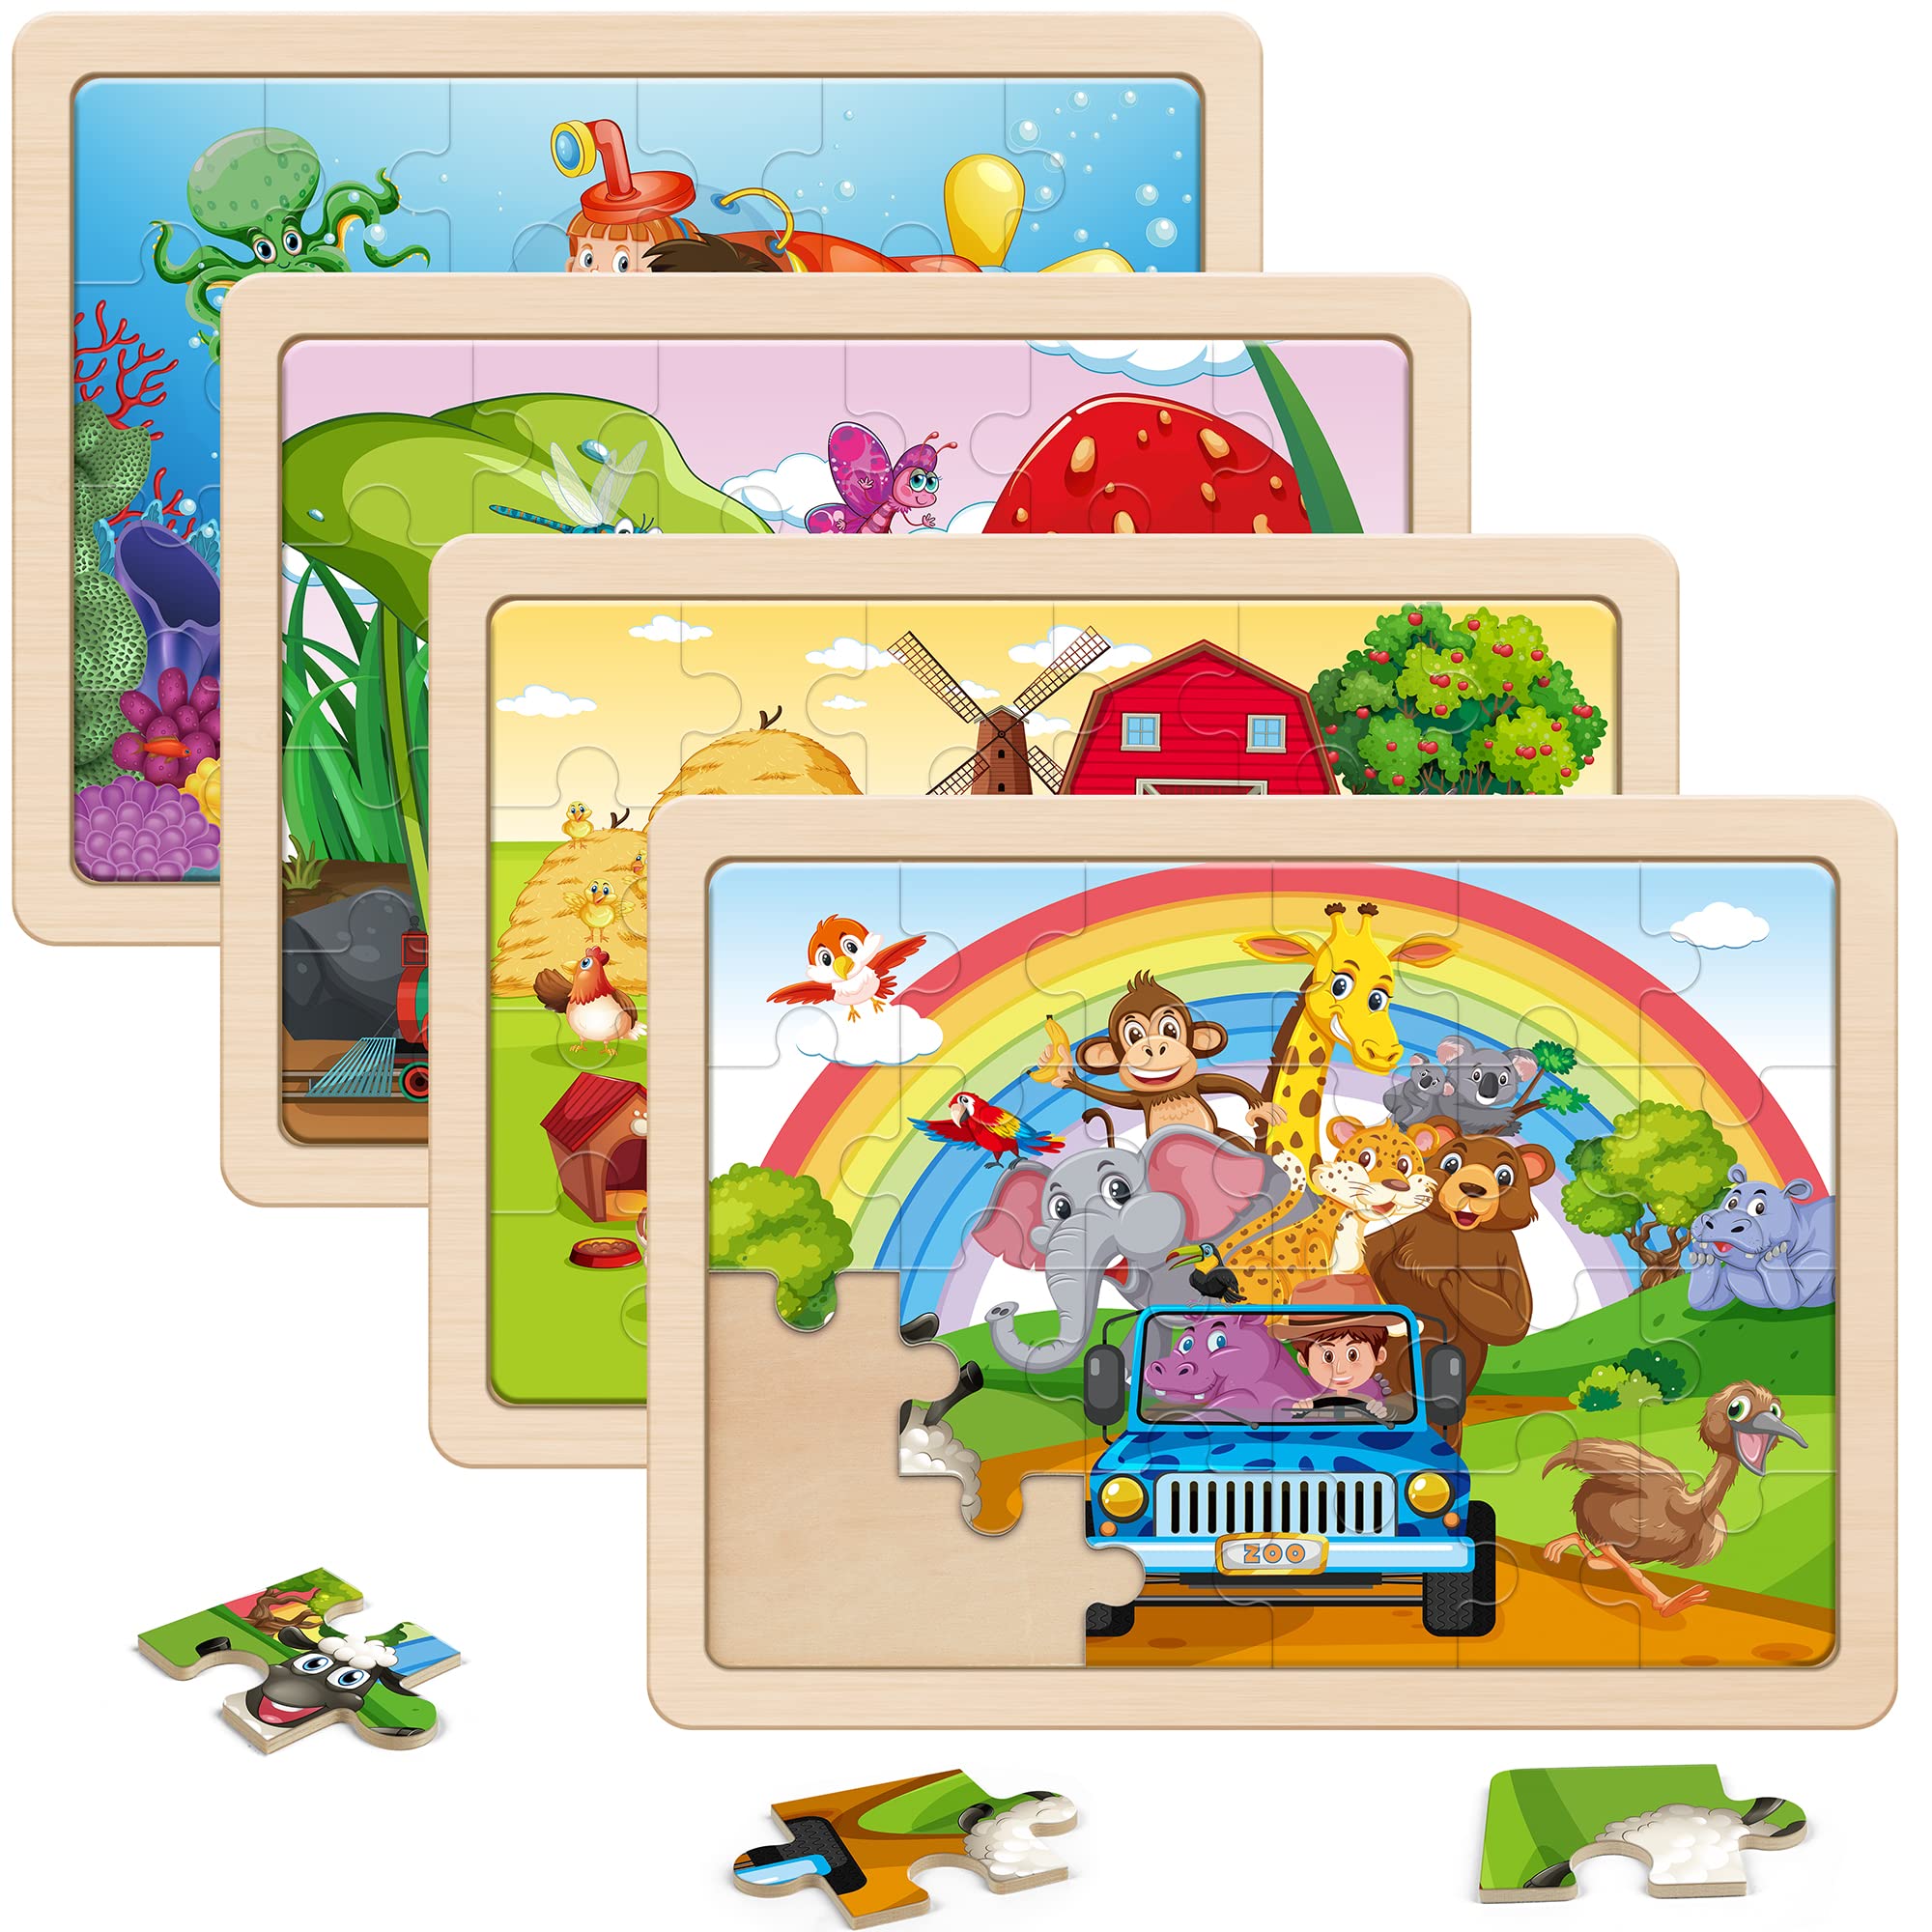 SYNARRY Wooden Puzzles for Kids Ages 3-5, 4 Packs 24 PCs Wood Jigsaw Puzzles Preschool Educational Brain Teaser Boards Toys, Zoo Farm Insect Sea Animals, Children Gifts for 3 4 5 6 Year Old Boys Girls